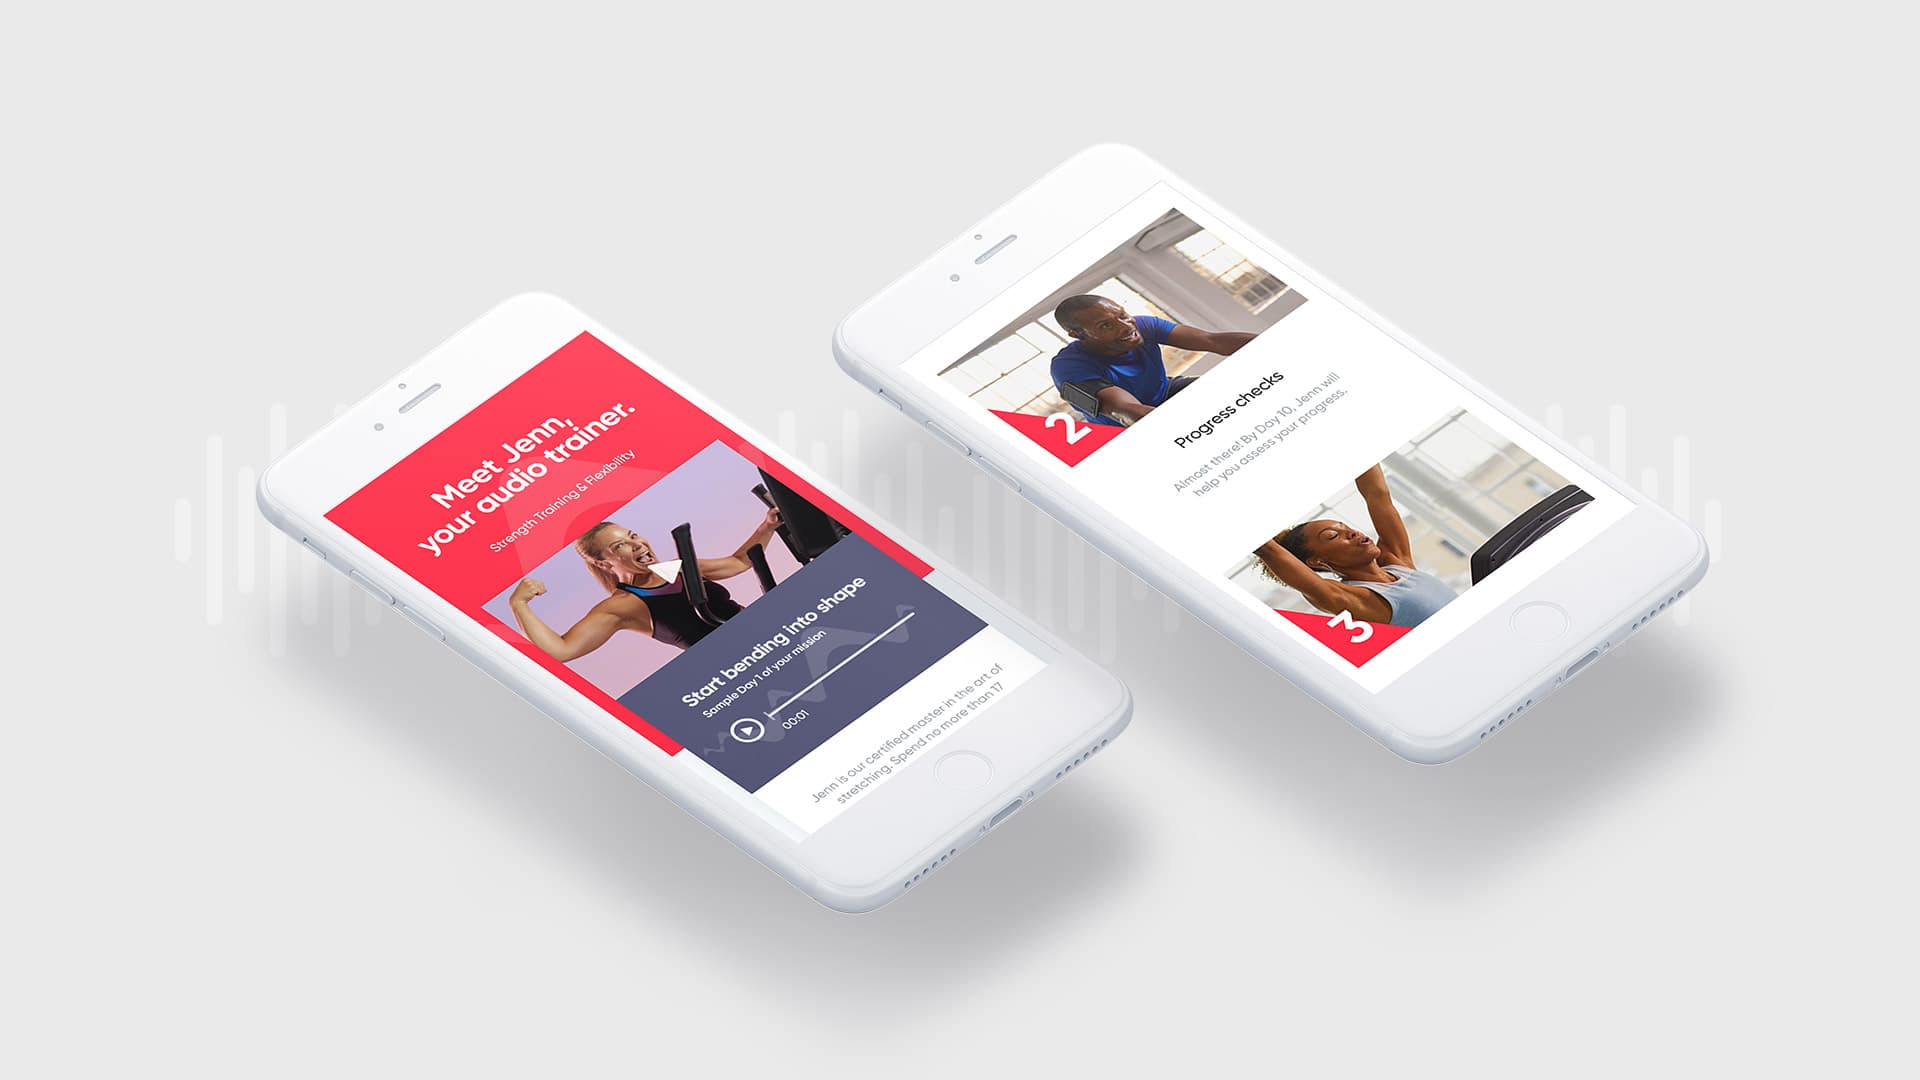 crafted-transformed-the-fitness-app-aaptiv-for-a-better-experience-art-direction